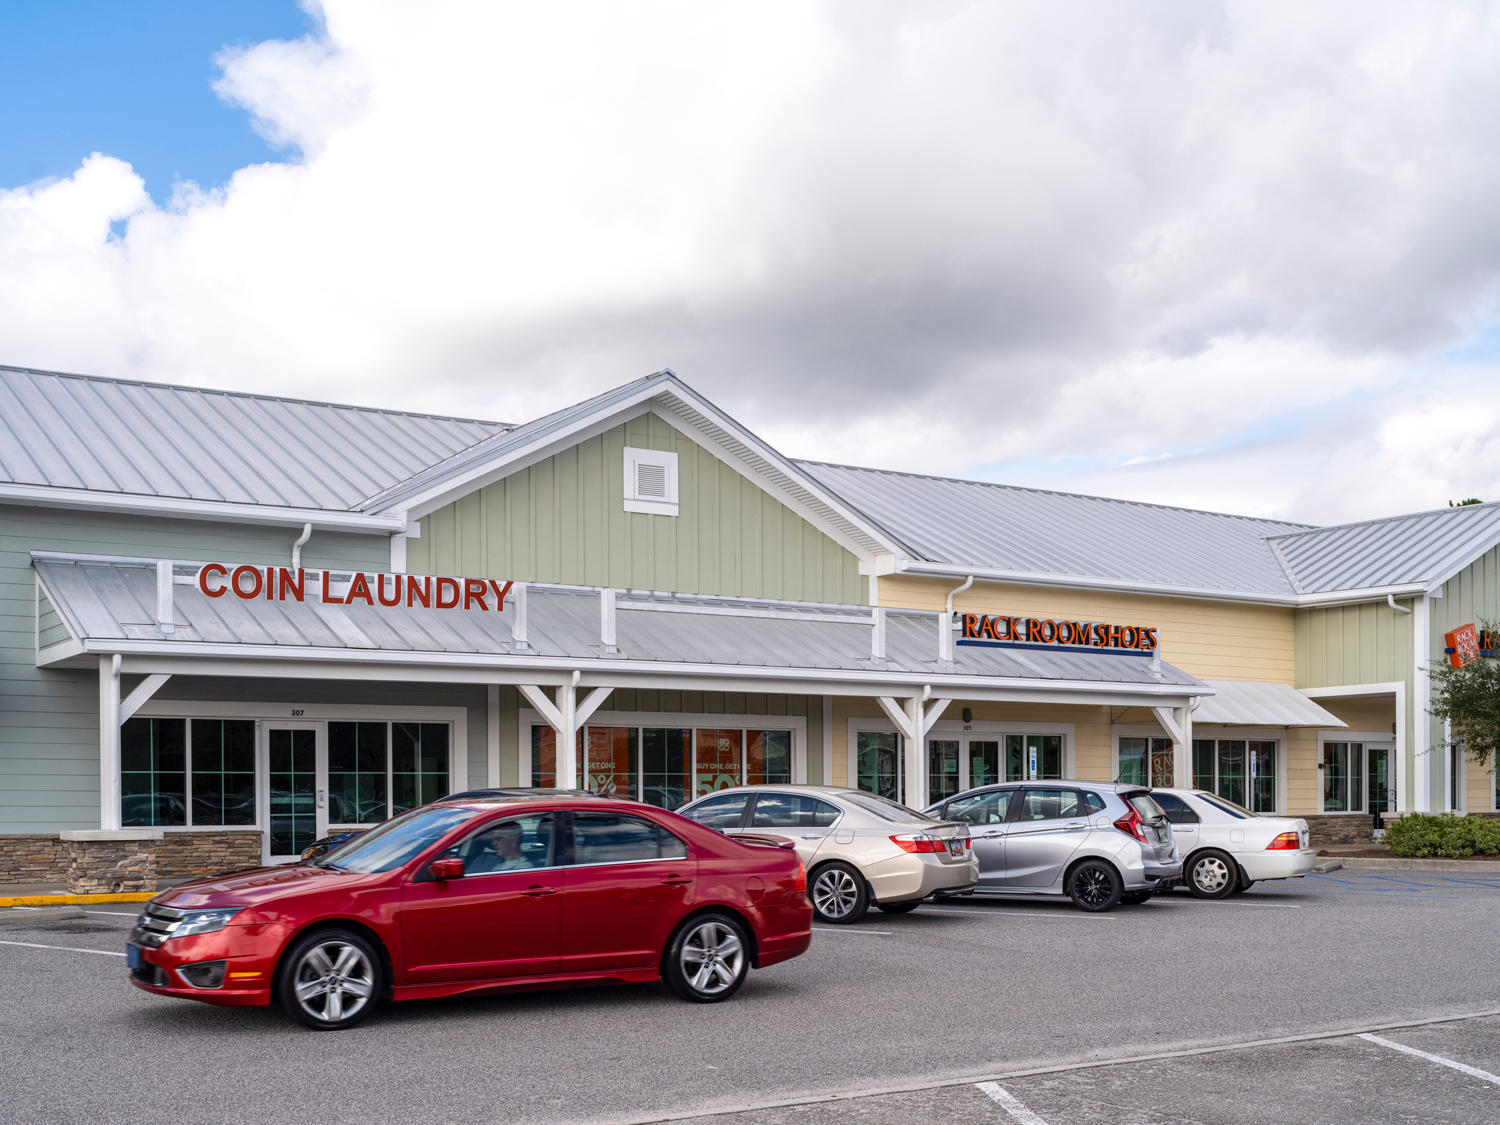 Coin Laundry, Rack Sack Shoes at Pawleys Island Plaza Shopping Center